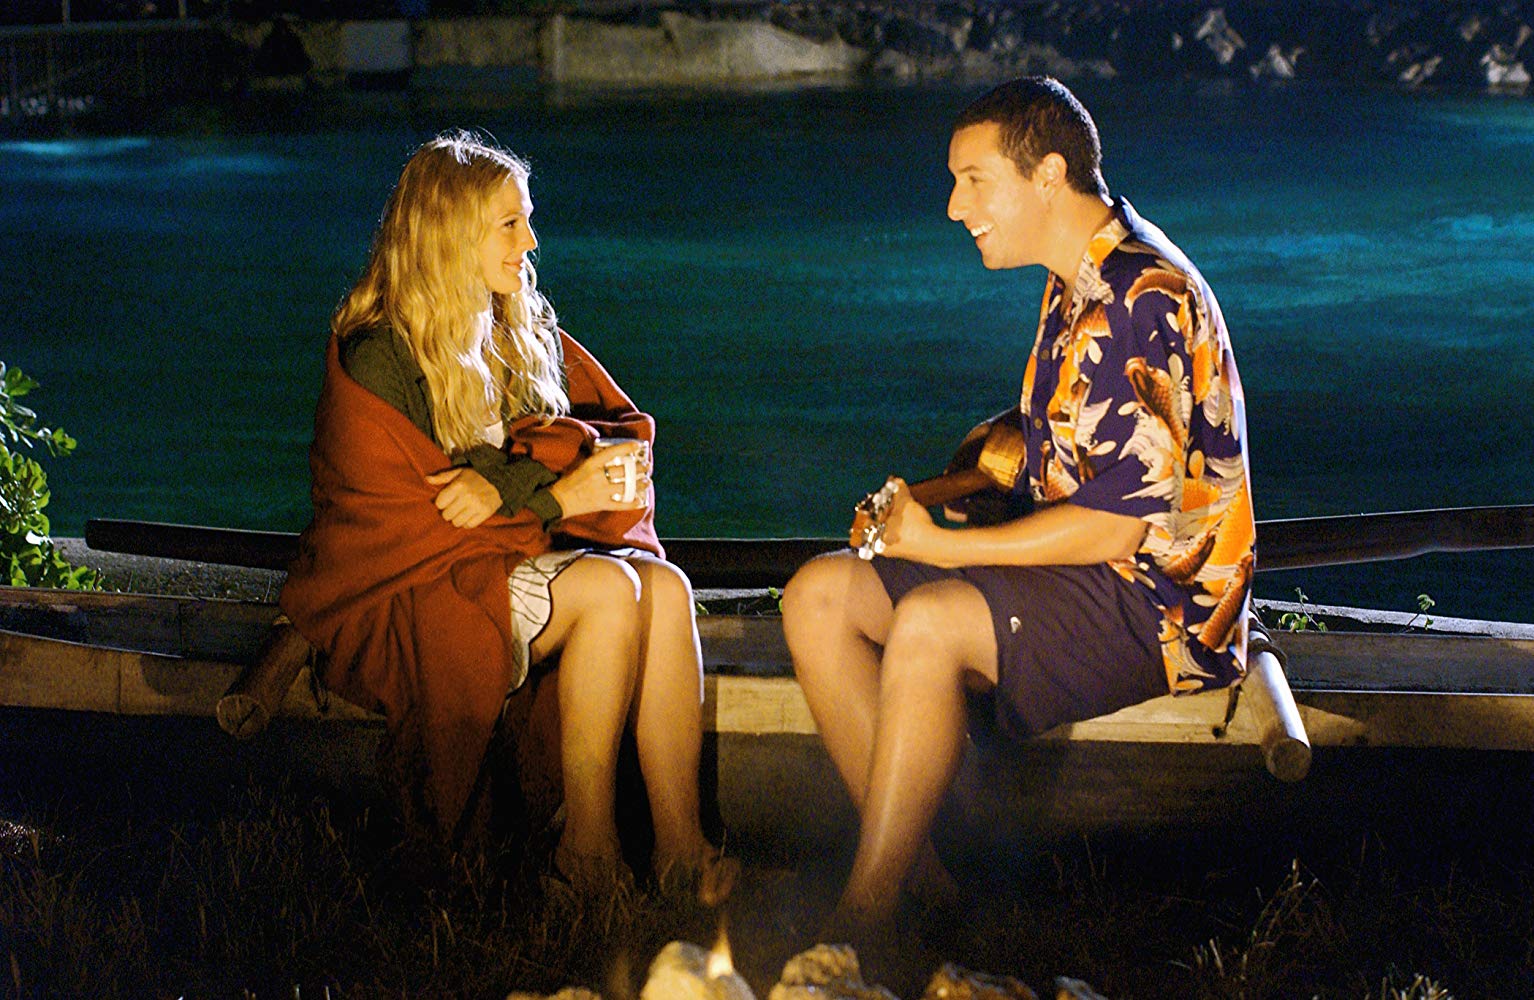 Cast of 50 first dates